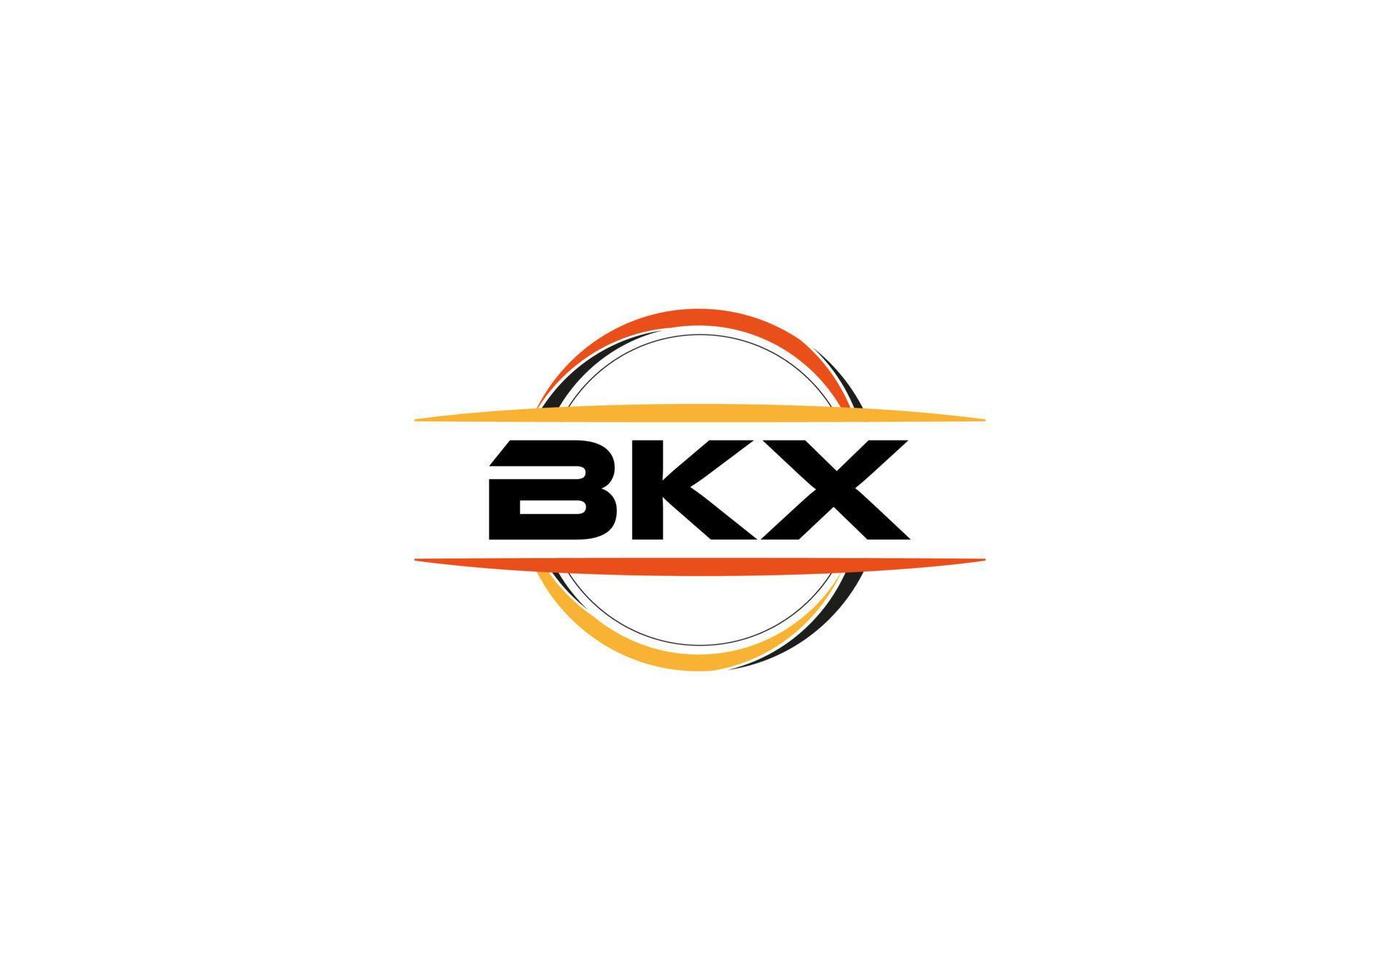 BKX letter royalty ellipse shape logo. BKX brush art logo. BKX logo for a company, business, and commercial use. vector